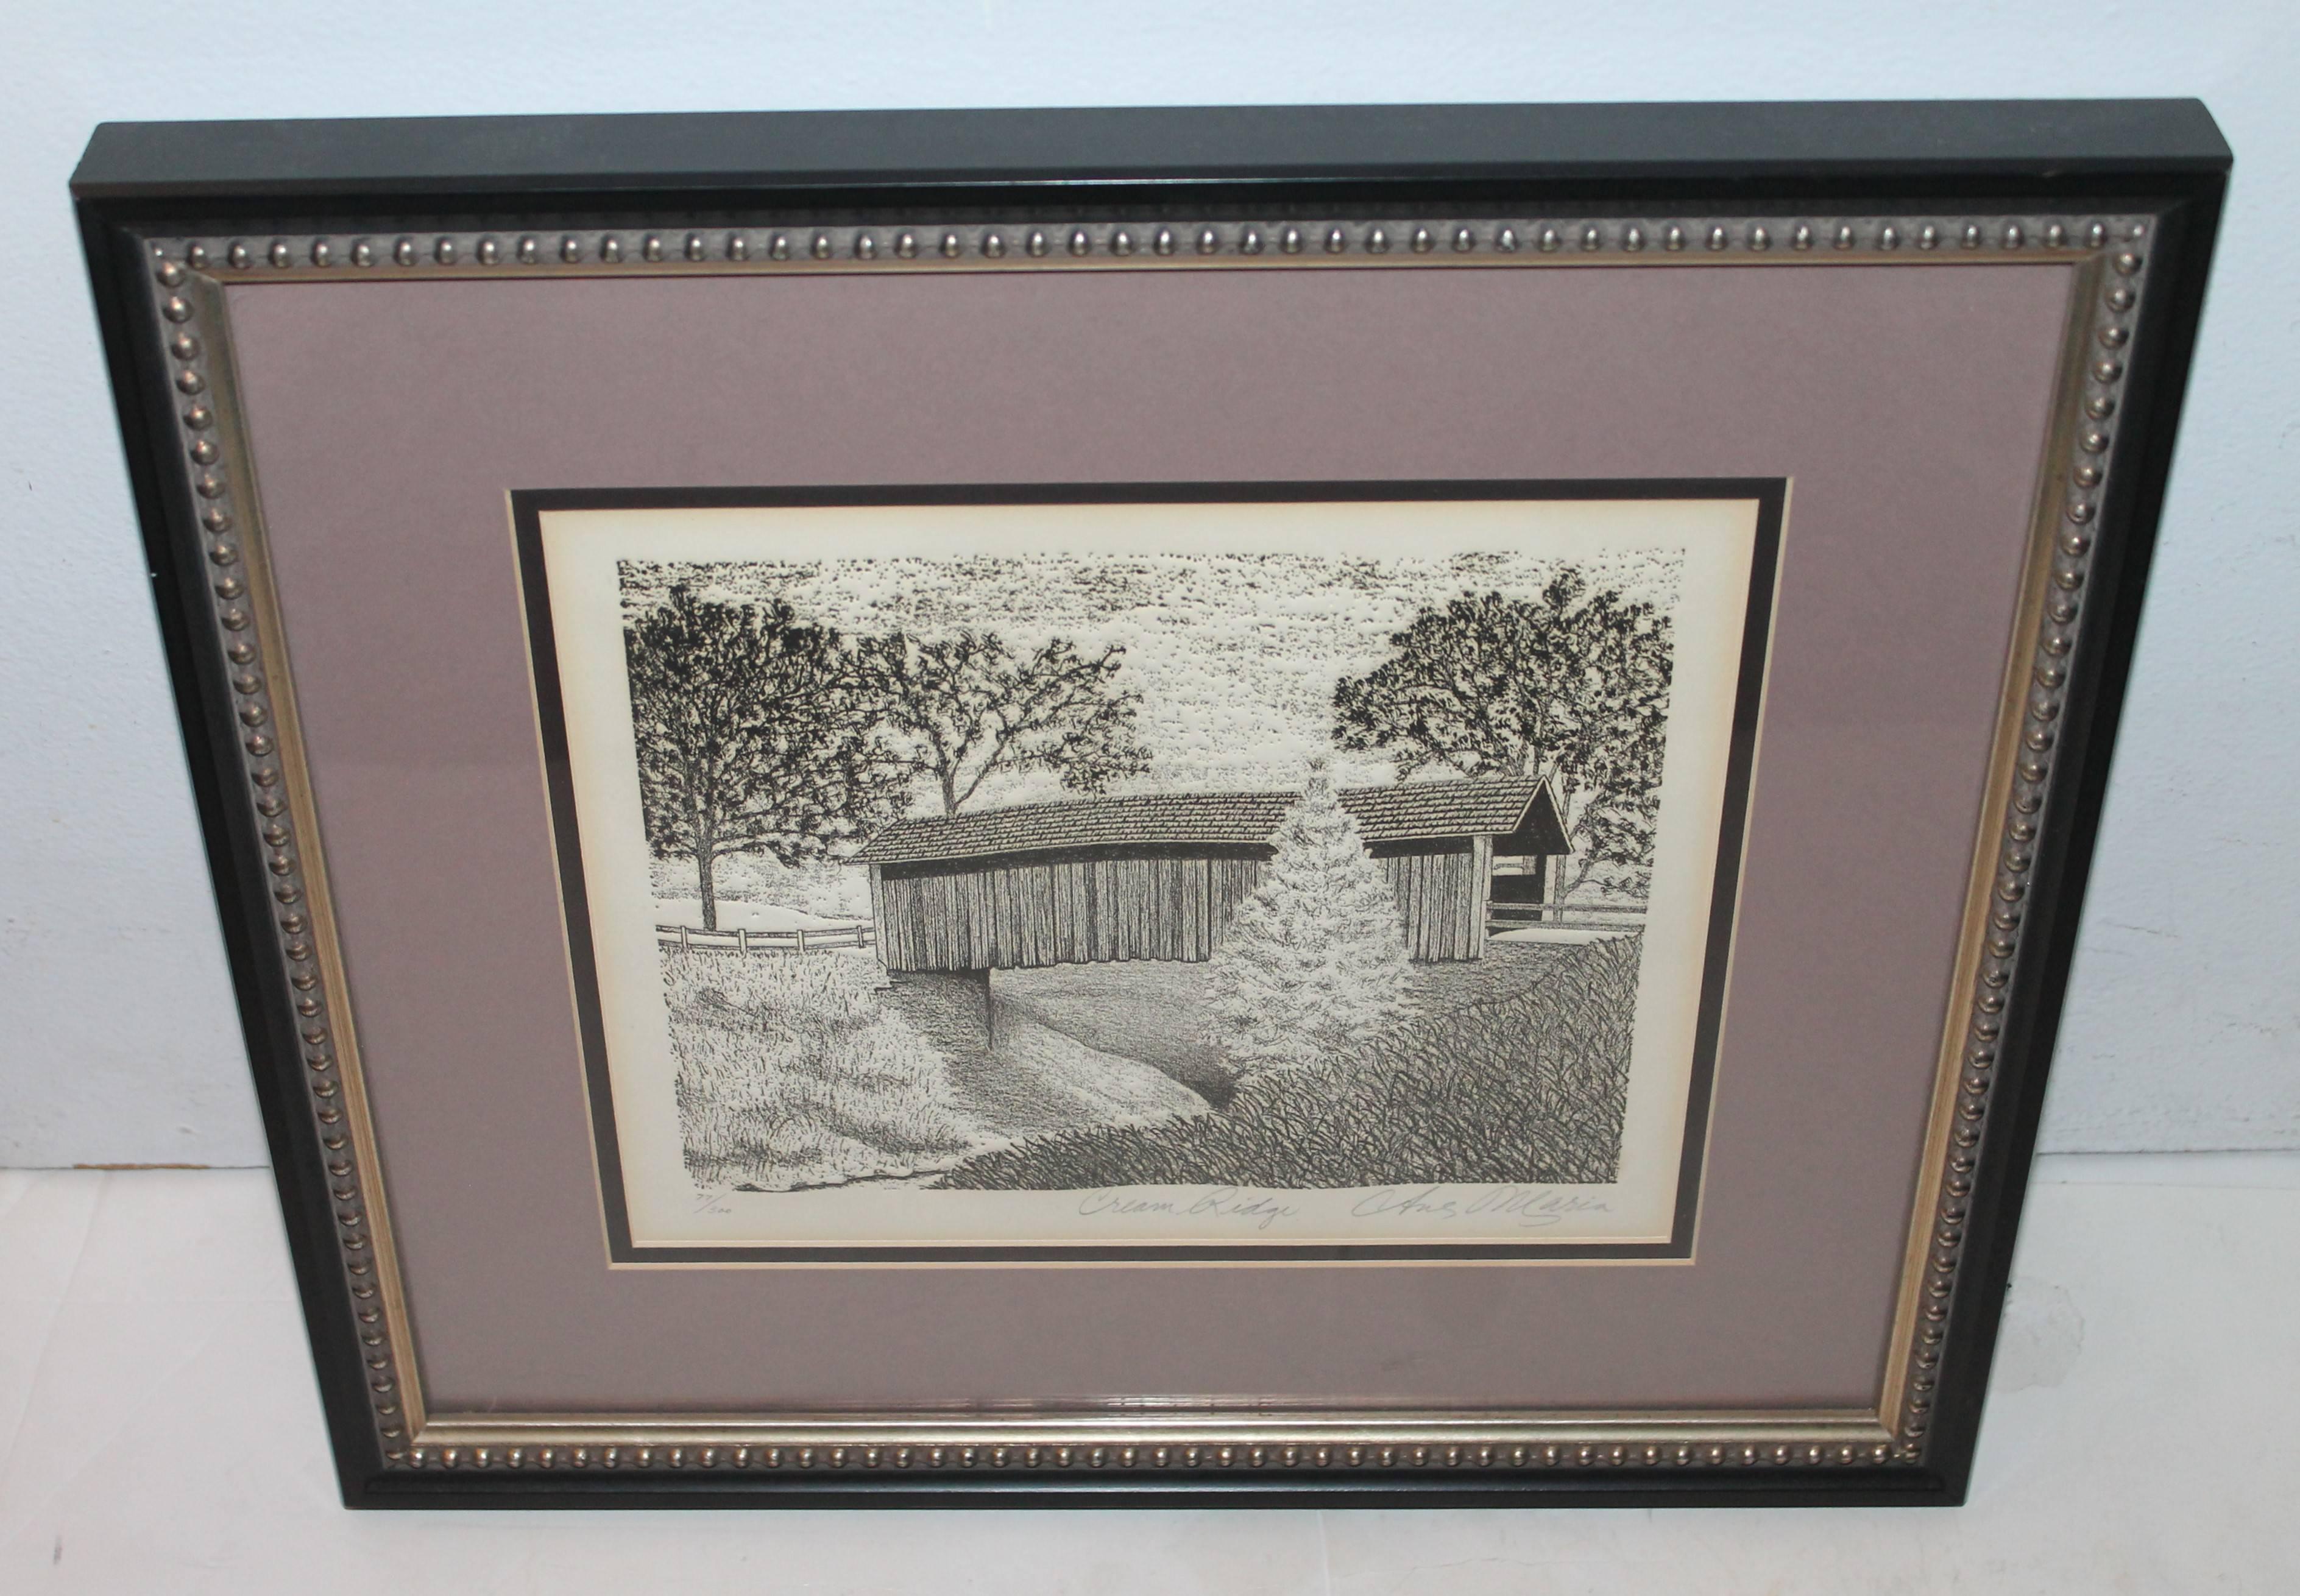 This amazing etching of a covered bridge in Cream Ridge, New Jersey. It is in upper Freehold Township in Monmouth County, New Jersey. This is a big farmland area. This is signed by the artist Chris Maria and numbered 77. The detail and the work is